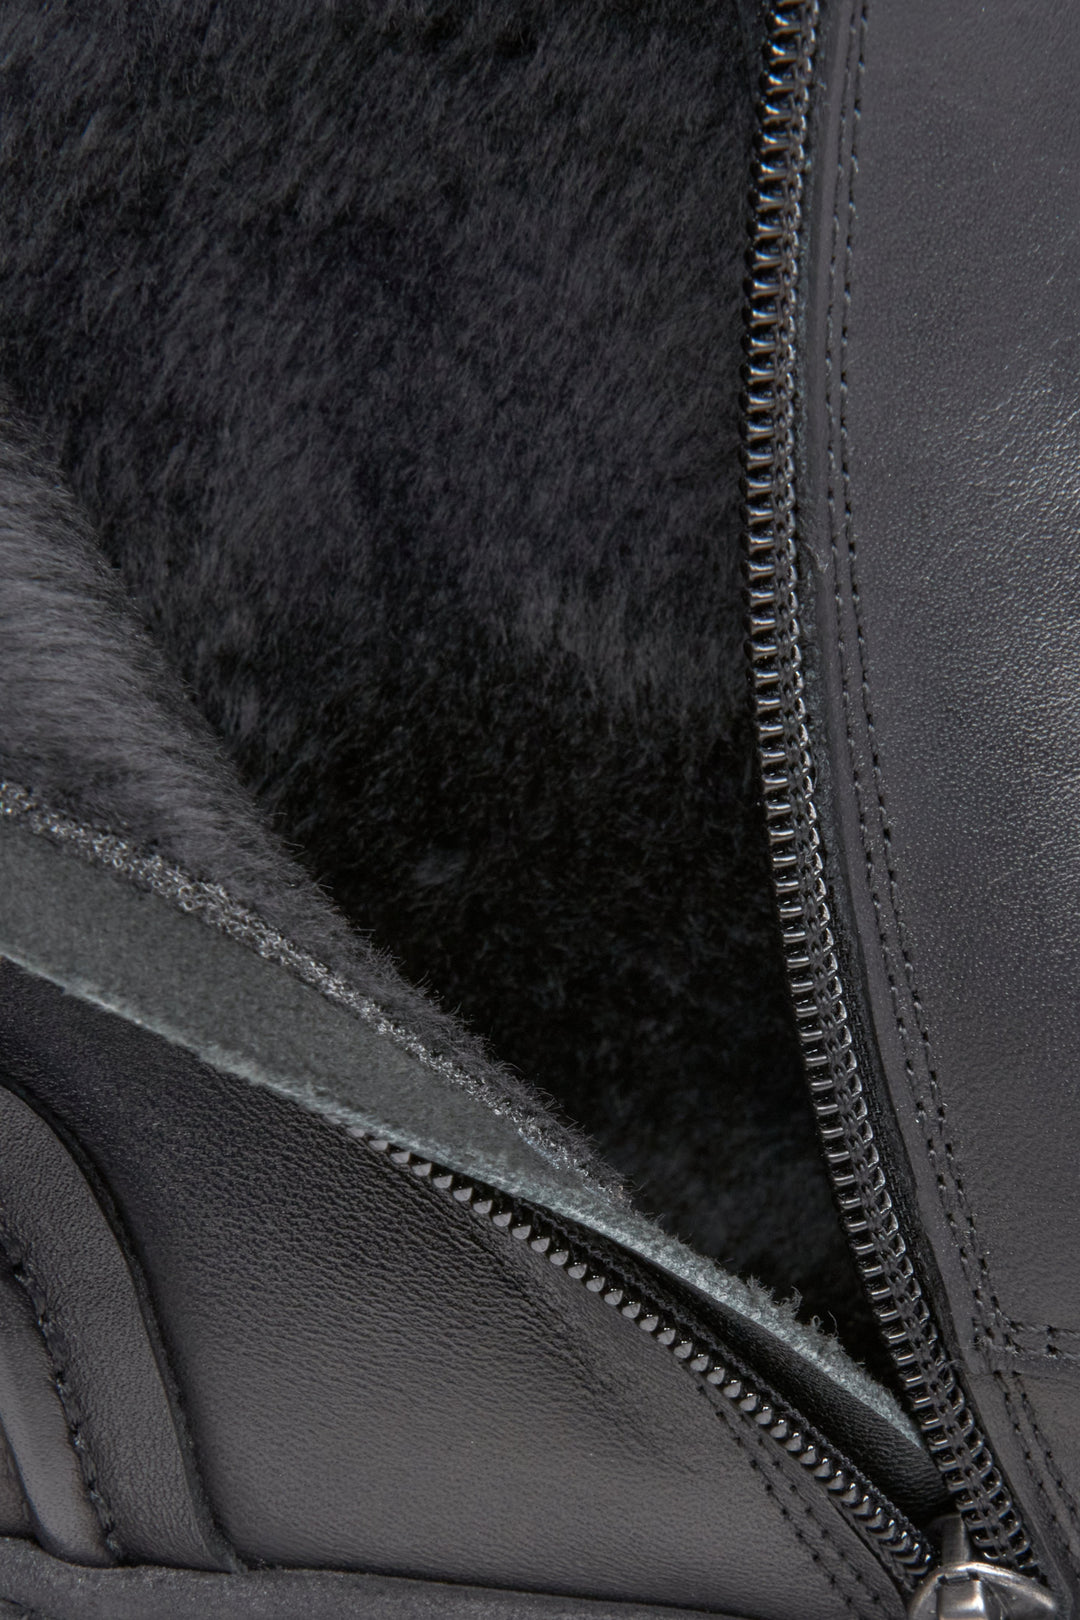 Women's Estro black leather ankle boots - close-up on the interior.